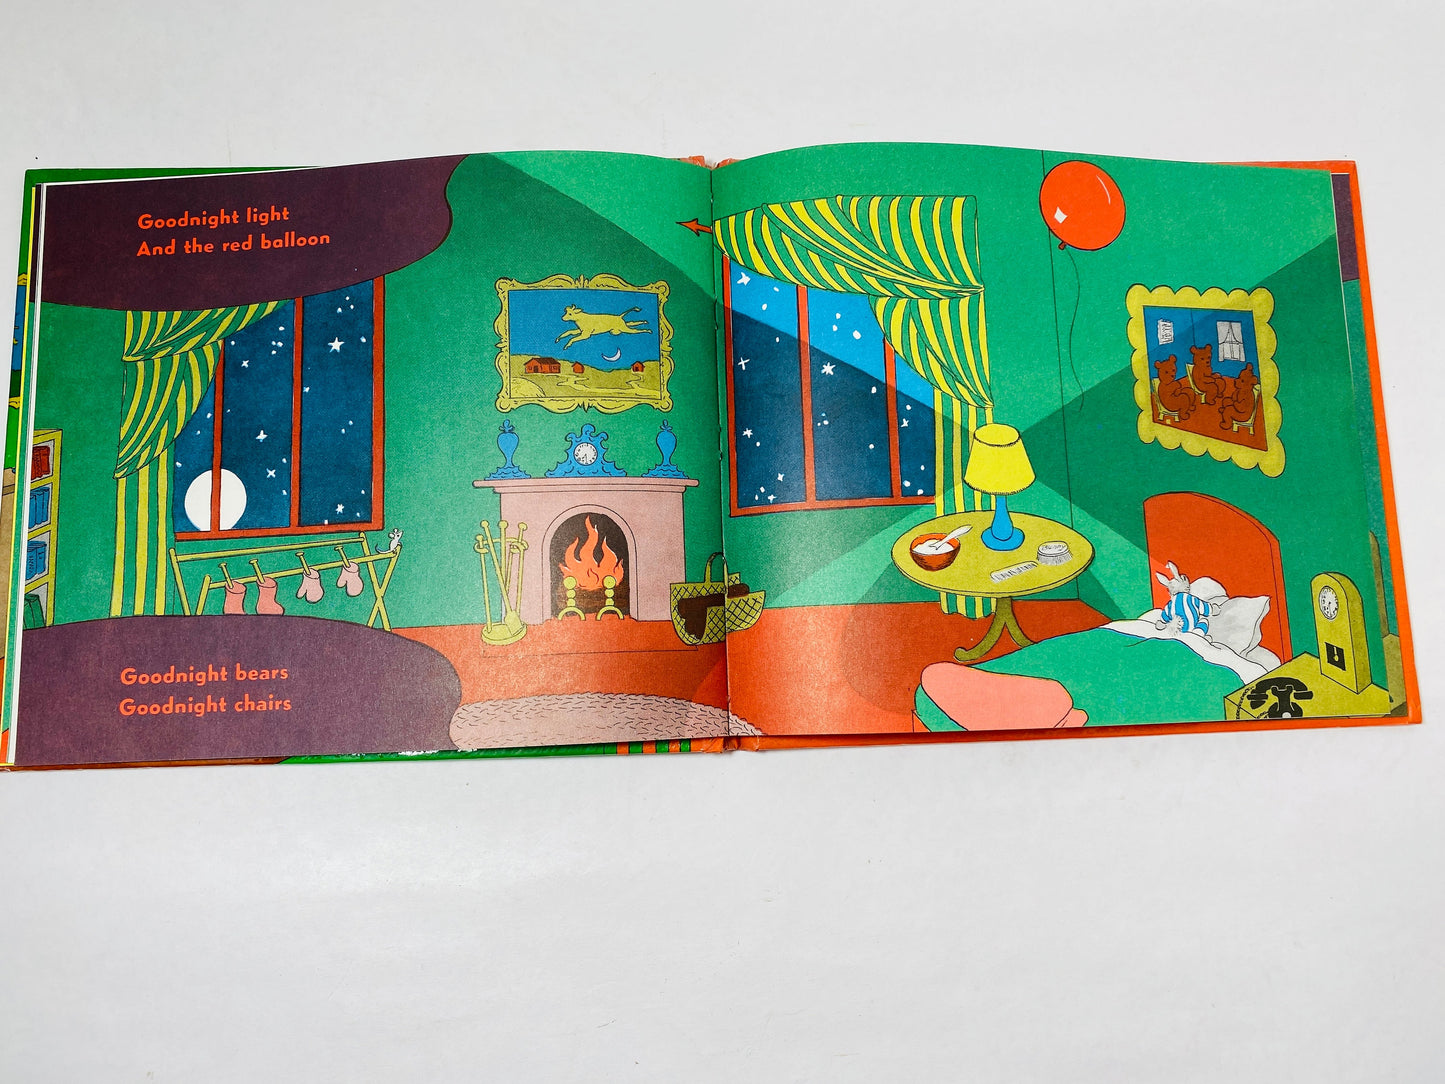 Goodnight Moon by Margaret Wise Brown EARLY PRINTING vintage book circa 1947 Beautiful story illustrated by Clement Hurd